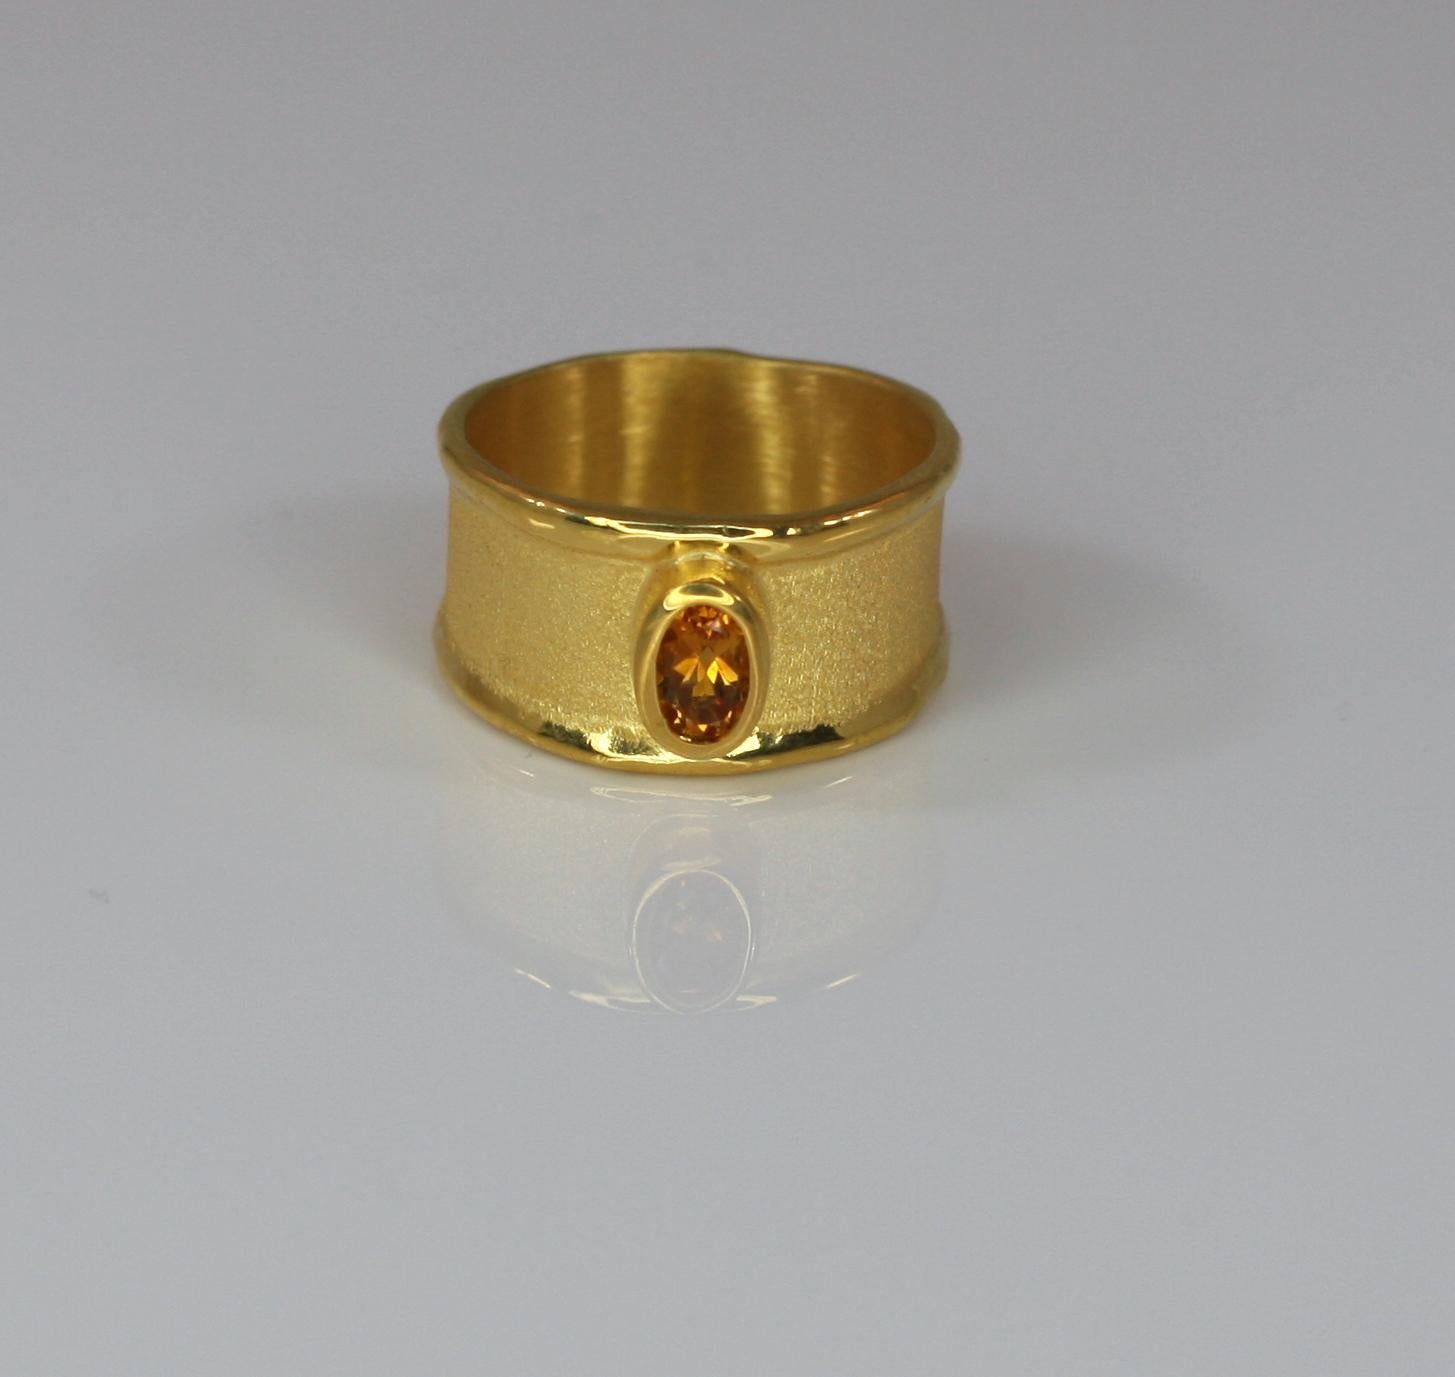 Yianni Creations fully handmade artisan band ring made from 18 Karat yellow gold and features 0.45 Carat oval-shape Citrine. This tone in tone gorgeous band attracts by its simplicity and by its unique techniques of craftsmanship - brushed texture